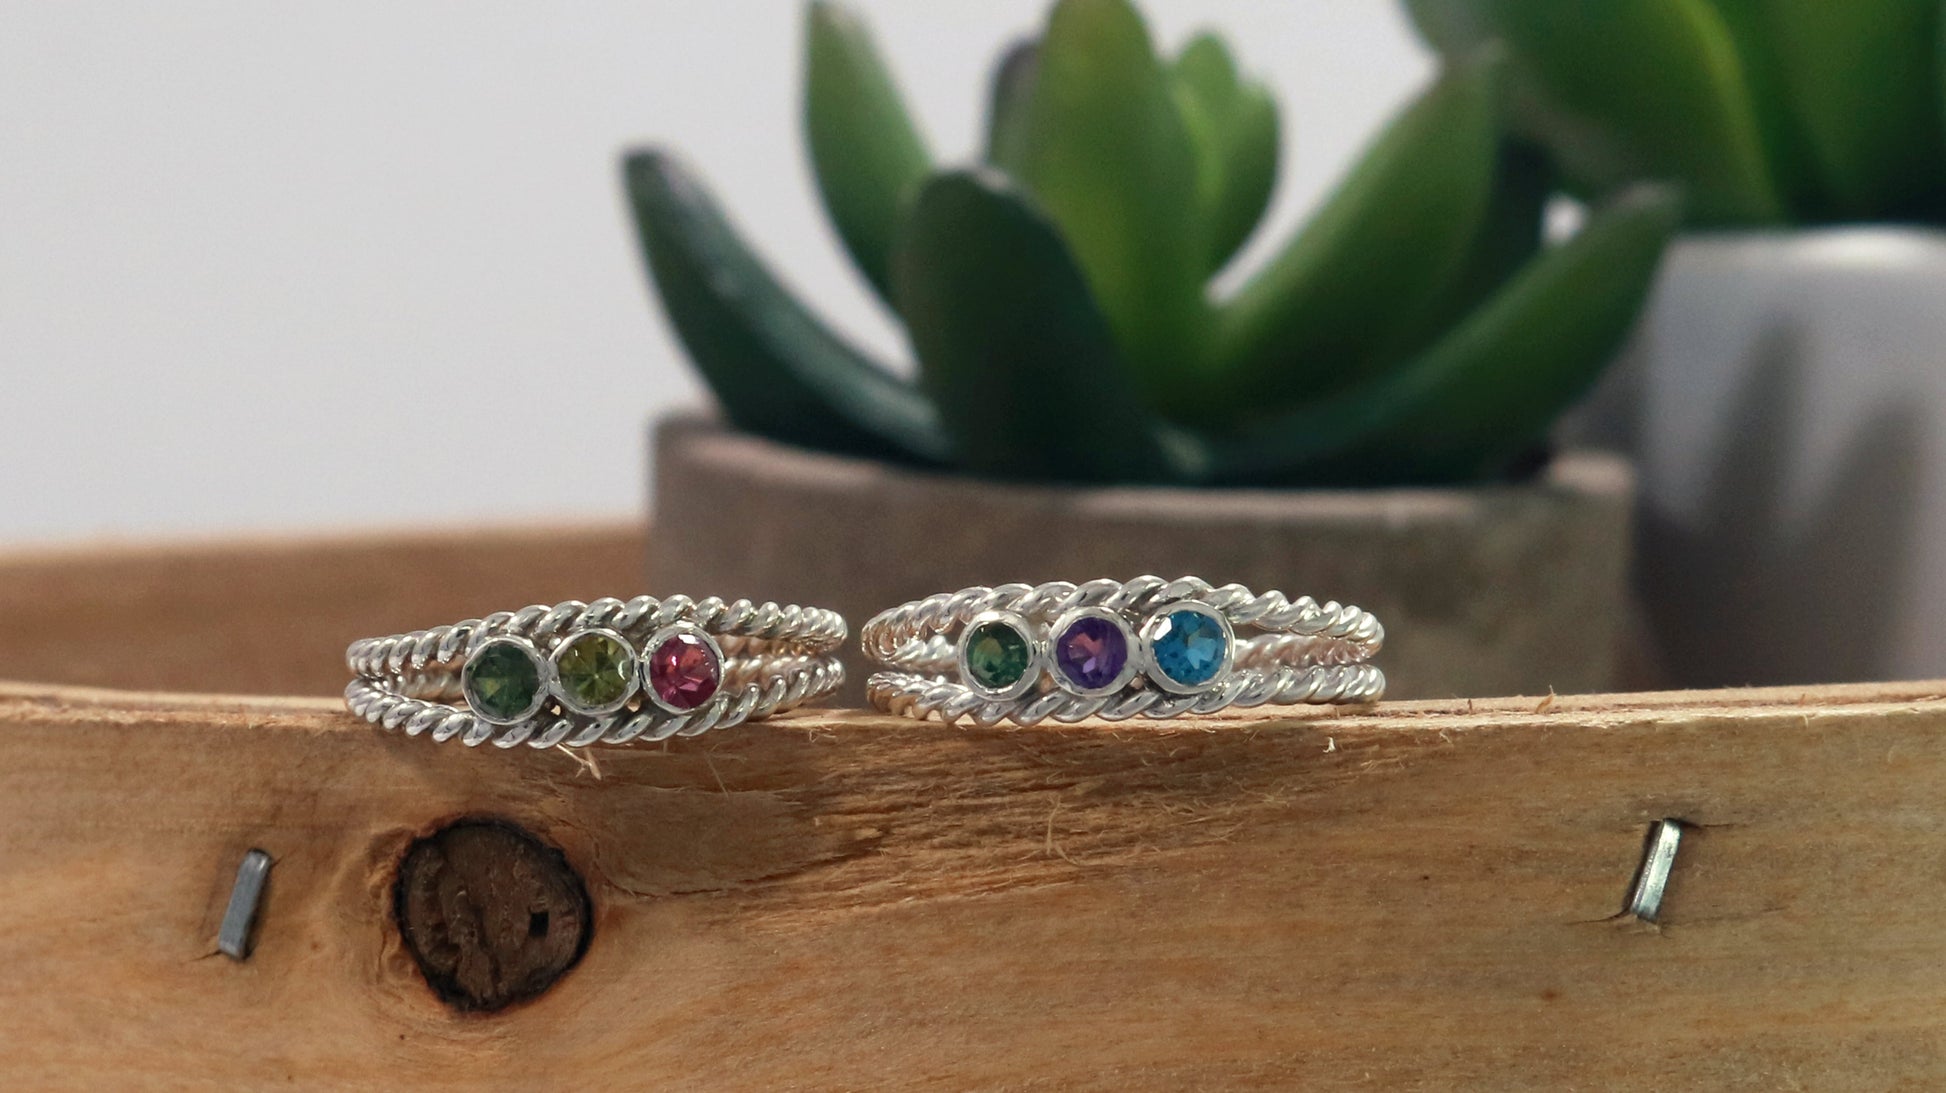 3 round natural gemstones bezel set in sterling silver between two twisted silver ring bands. 